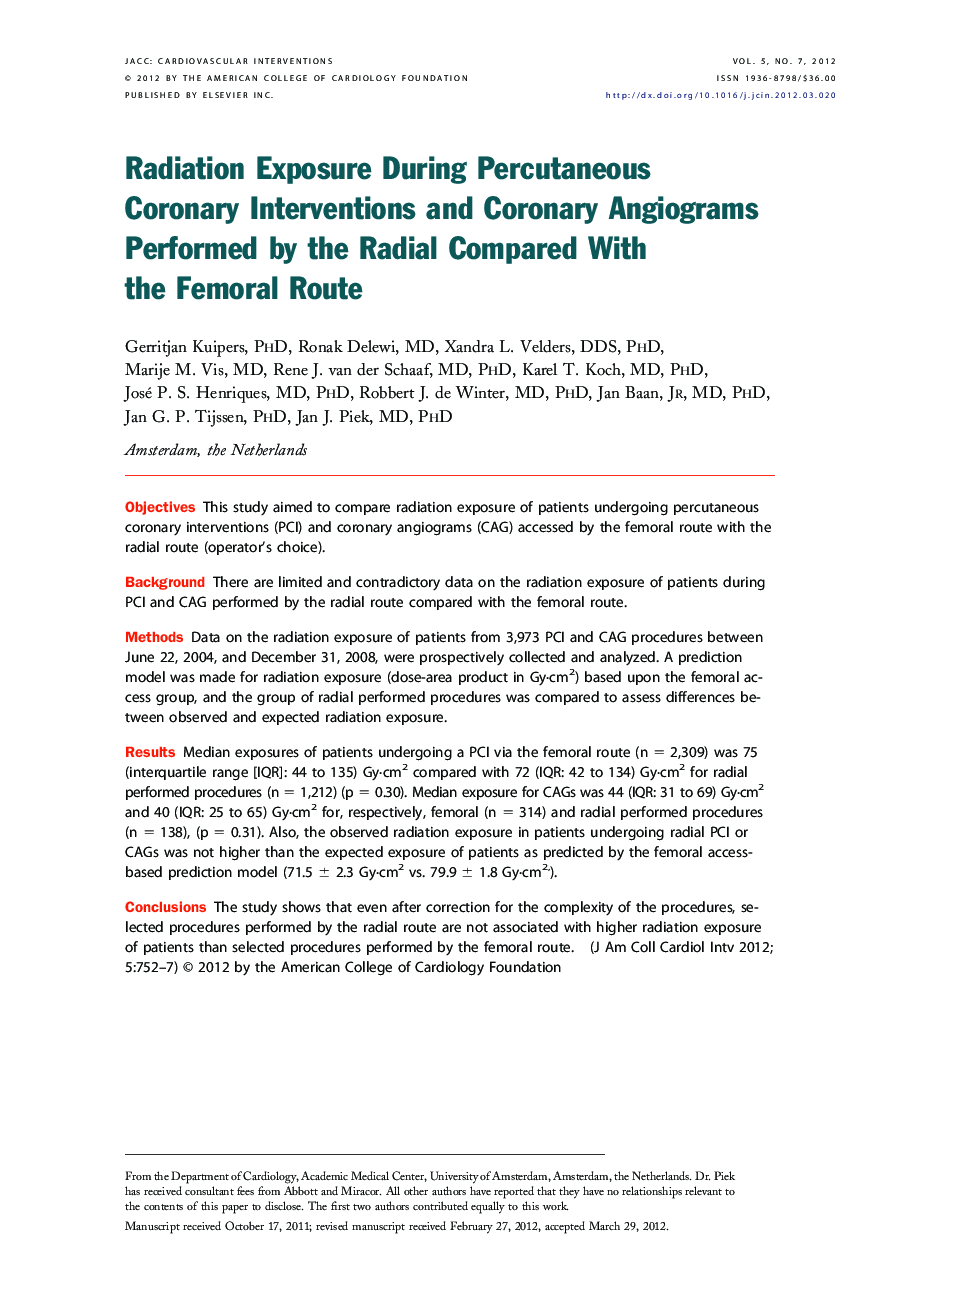 Radiation Exposure During Percutaneous Coronary Interventions and Coronary Angiograms Performed by the Radial Compared With the Femoral Route 